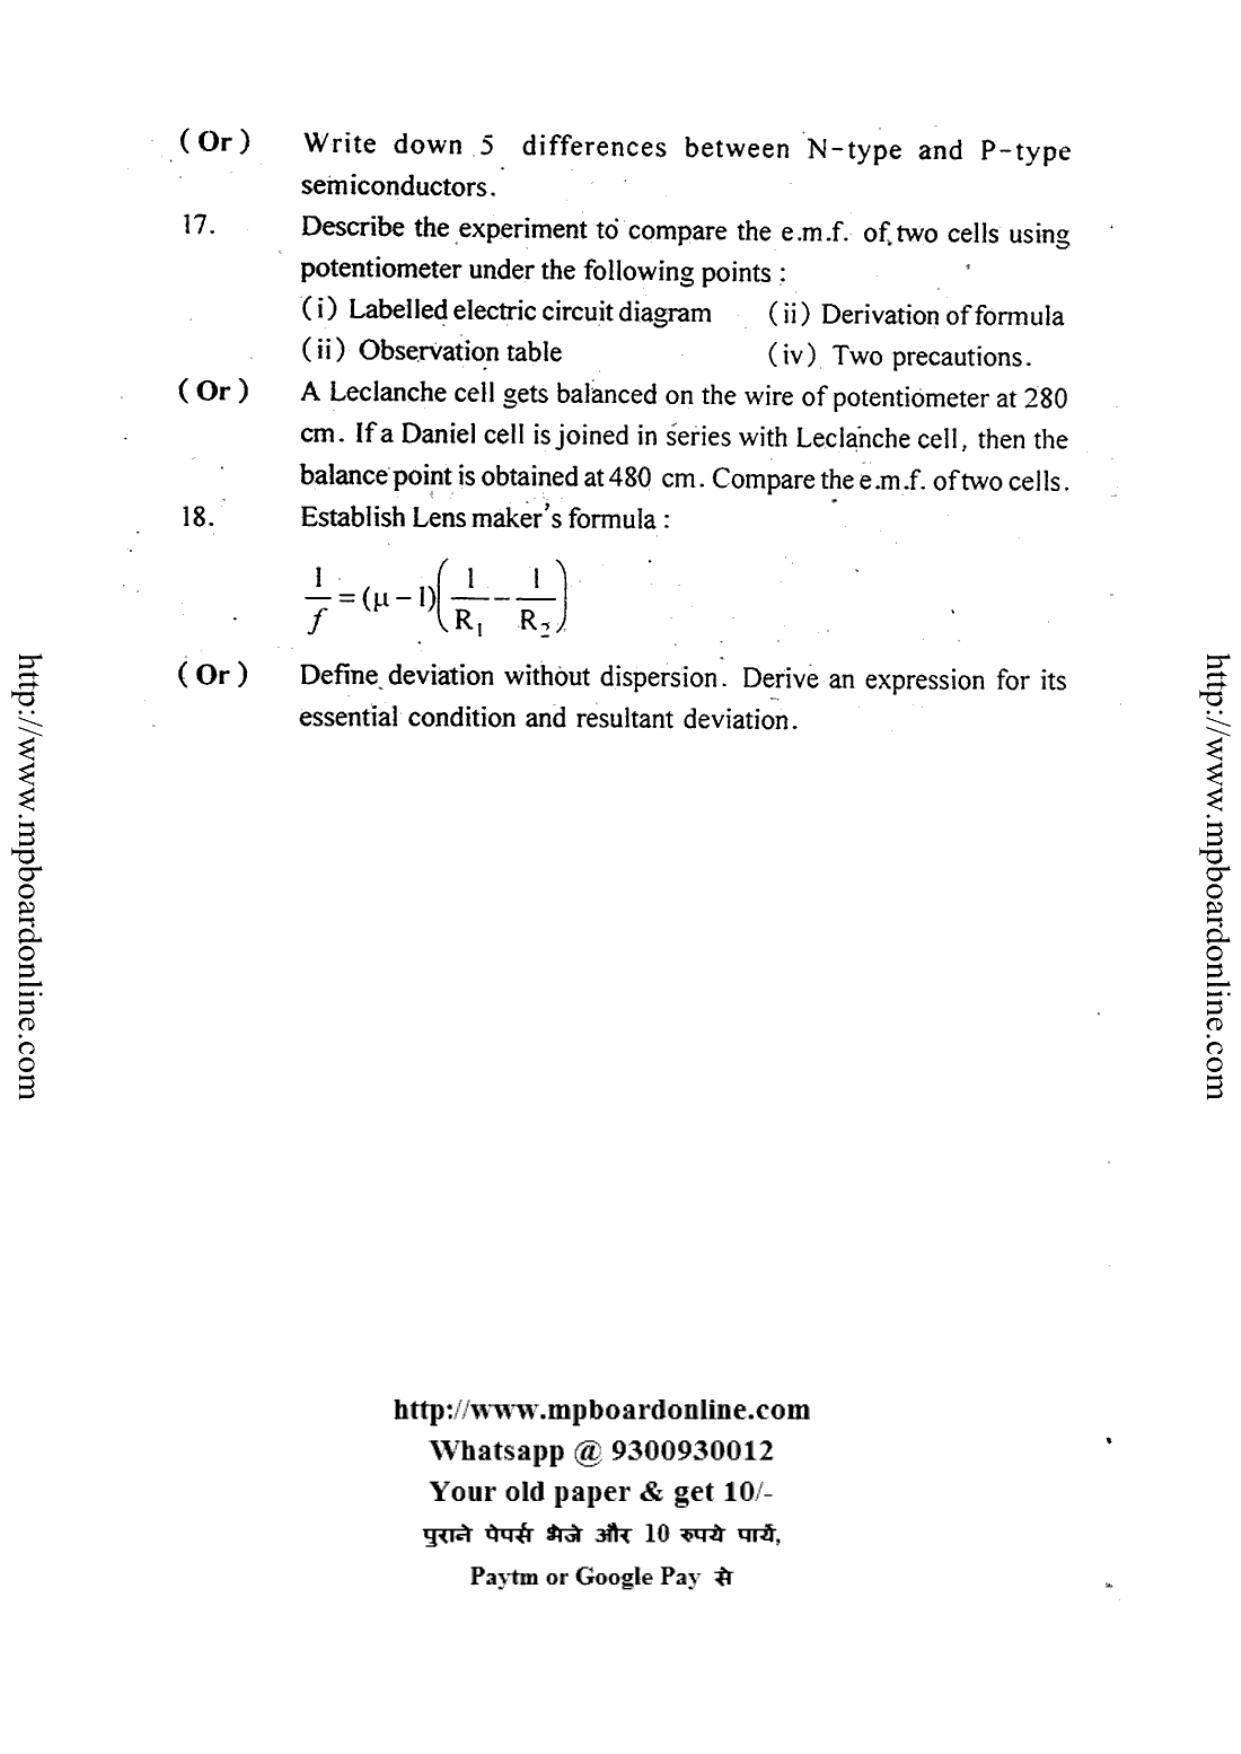 MP Board Class 12 Physics (English Medium) 2014 Question Paper - Page 4